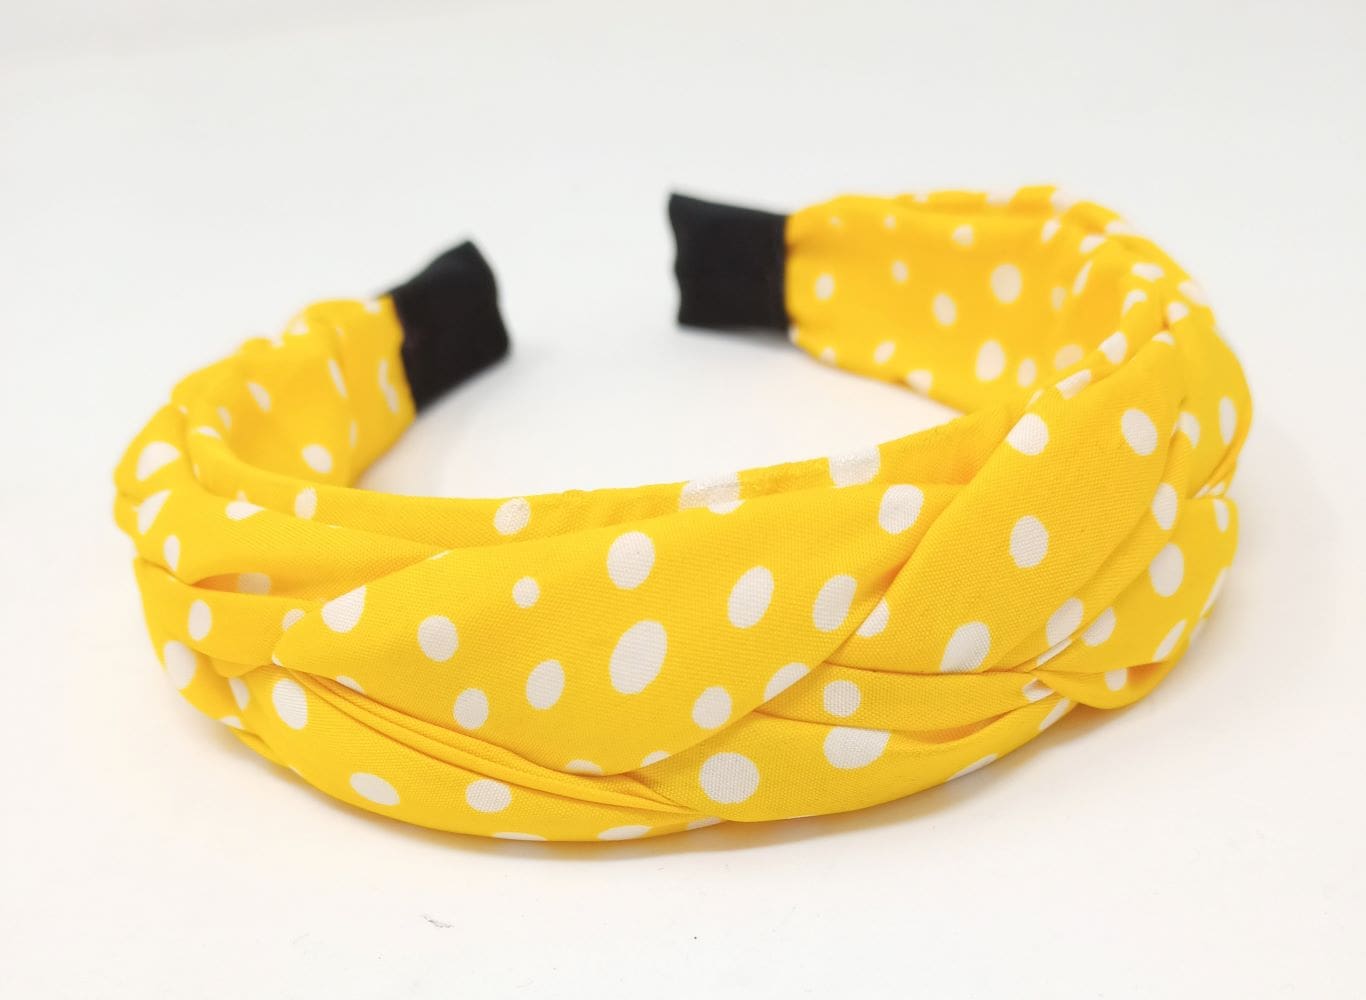 1 pc Yellow Hair Band with White Small Polka Dots Design / Stylish Plastic Hairband  Headband for Girls and Women Head Band (Yellow)- Pack of 1 pc - CouponRocks